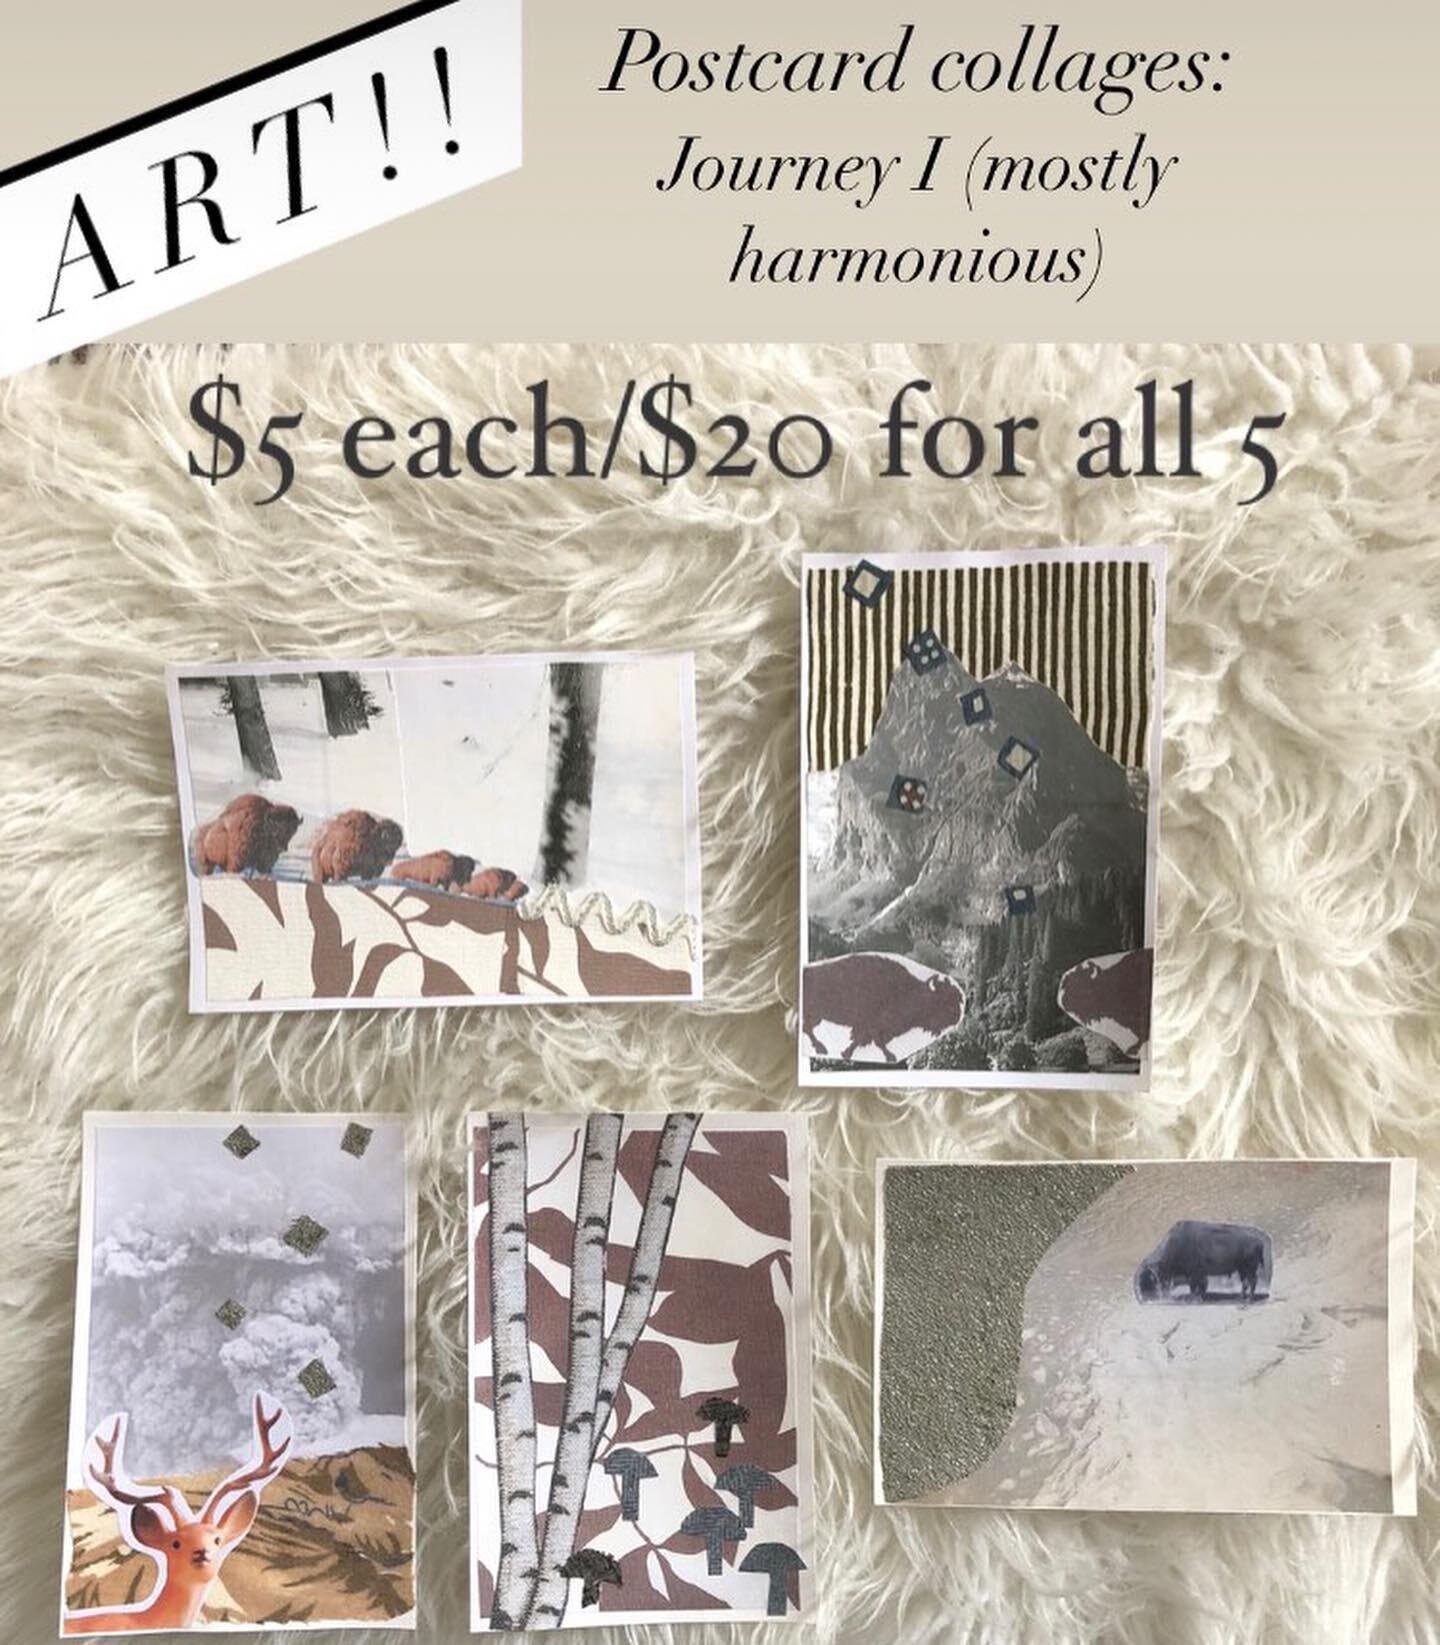 Art SALE! Next up: limited edition, one-of-a-kind, postcard collages. $5 each card OR $20 for each set of 5&ndash; Journey I (mostly harmonious) &amp; Journey II (mostly arduous). DM to purchase!